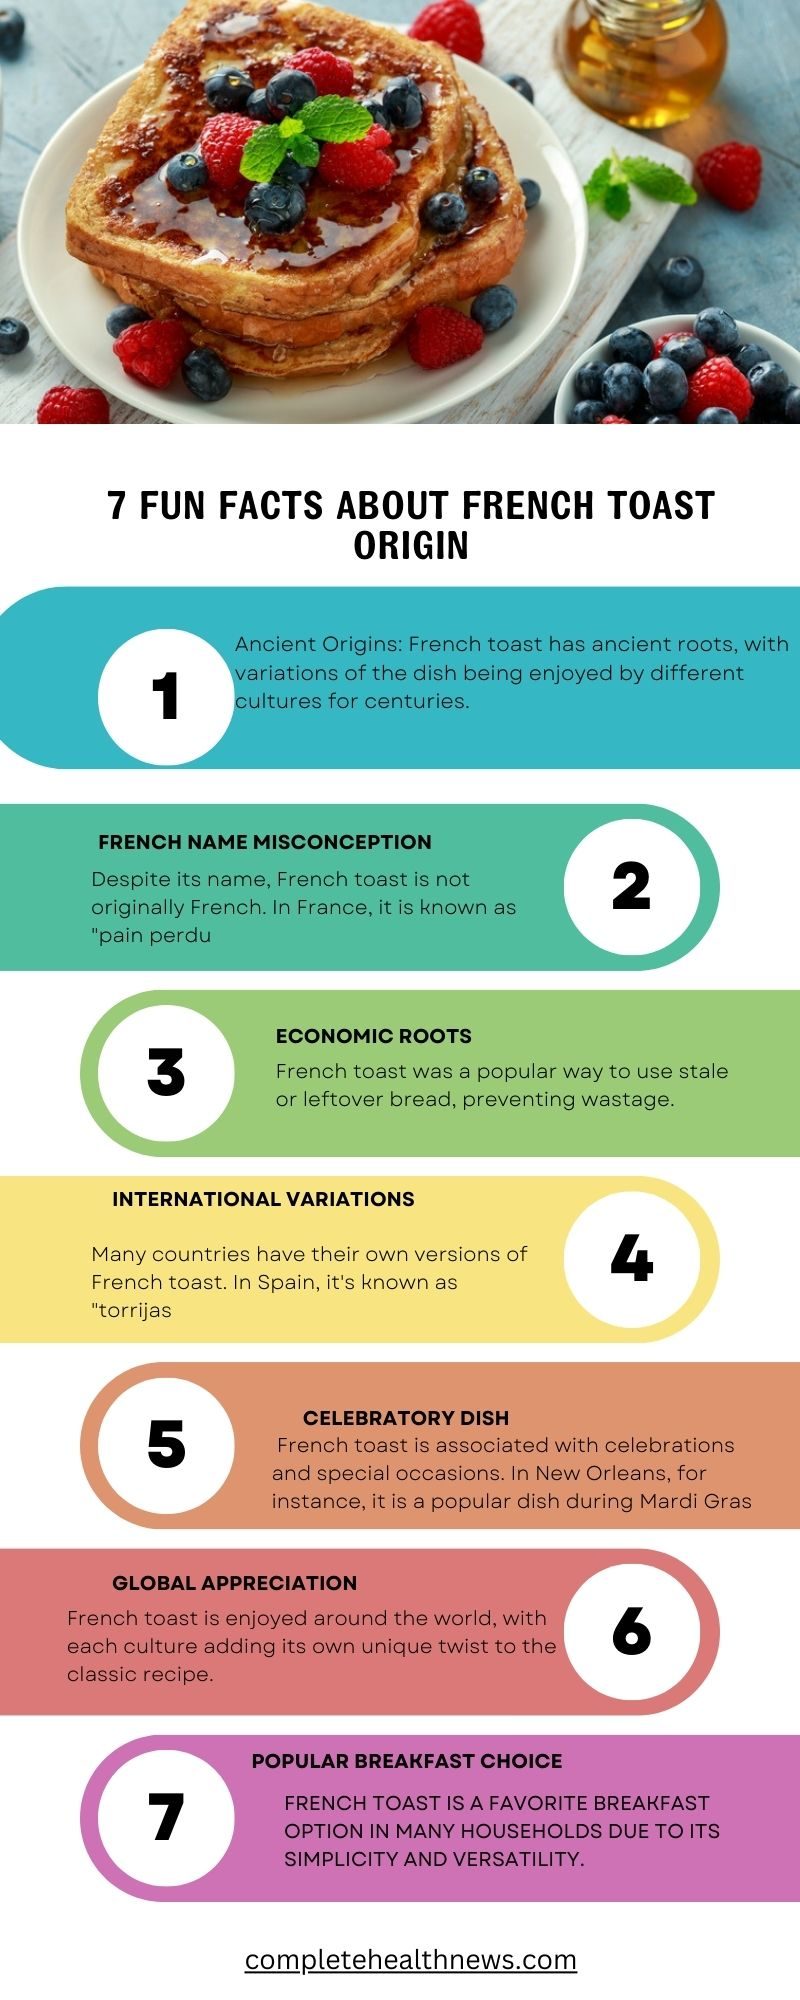 7 Fun Facts about French Toast Origin